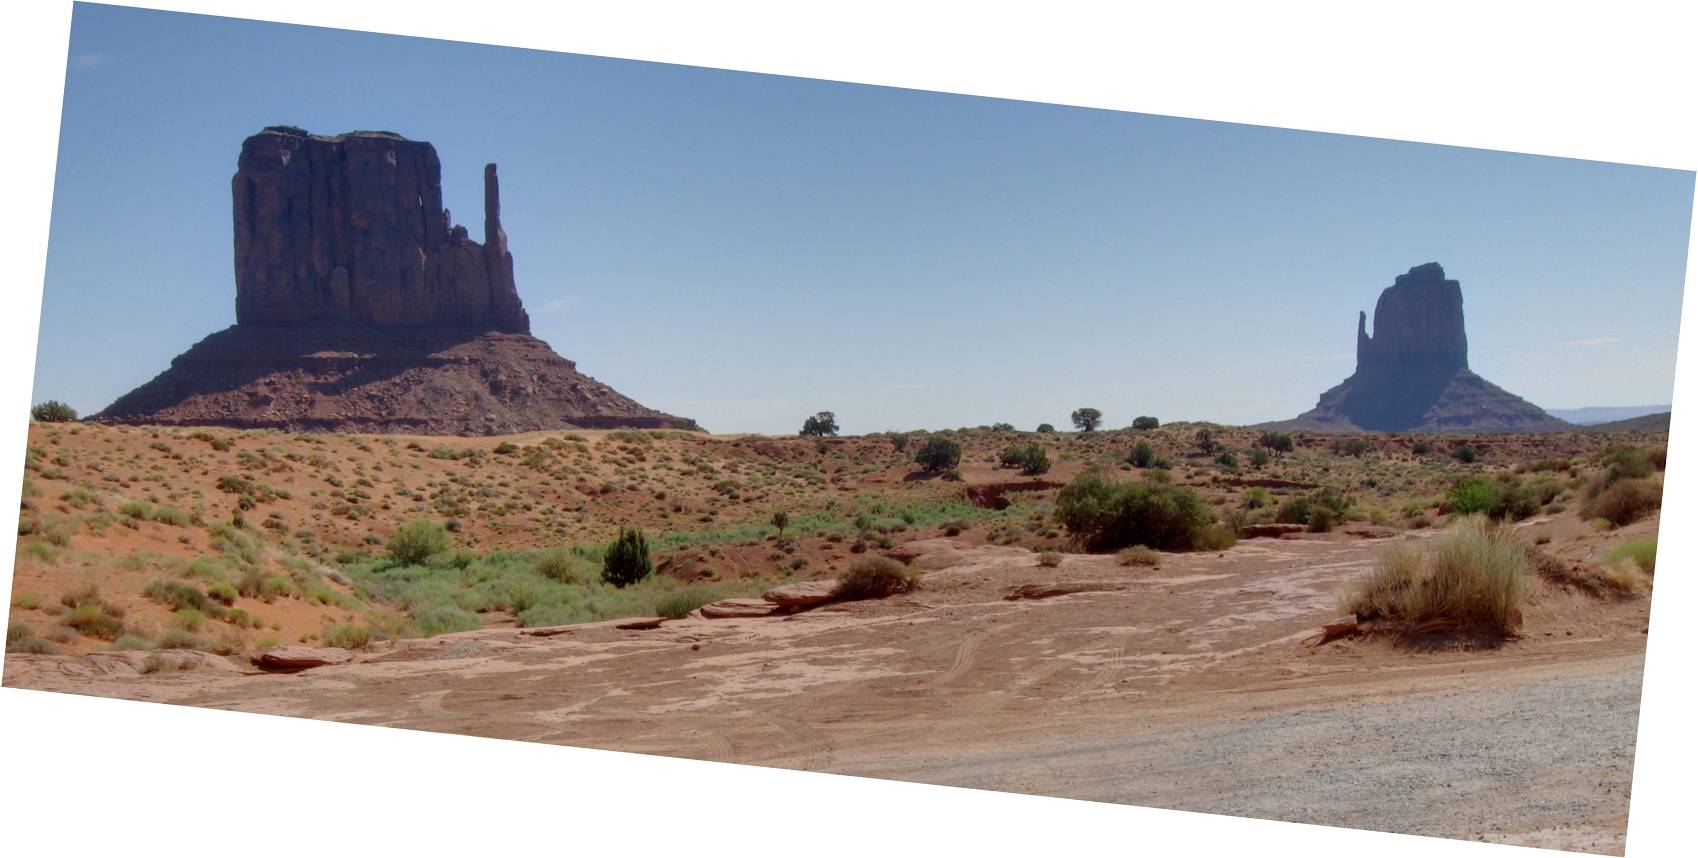 Image: The West (left) and the East Mitten (right) buttes as seen from a pull-in near the entrance to the national park